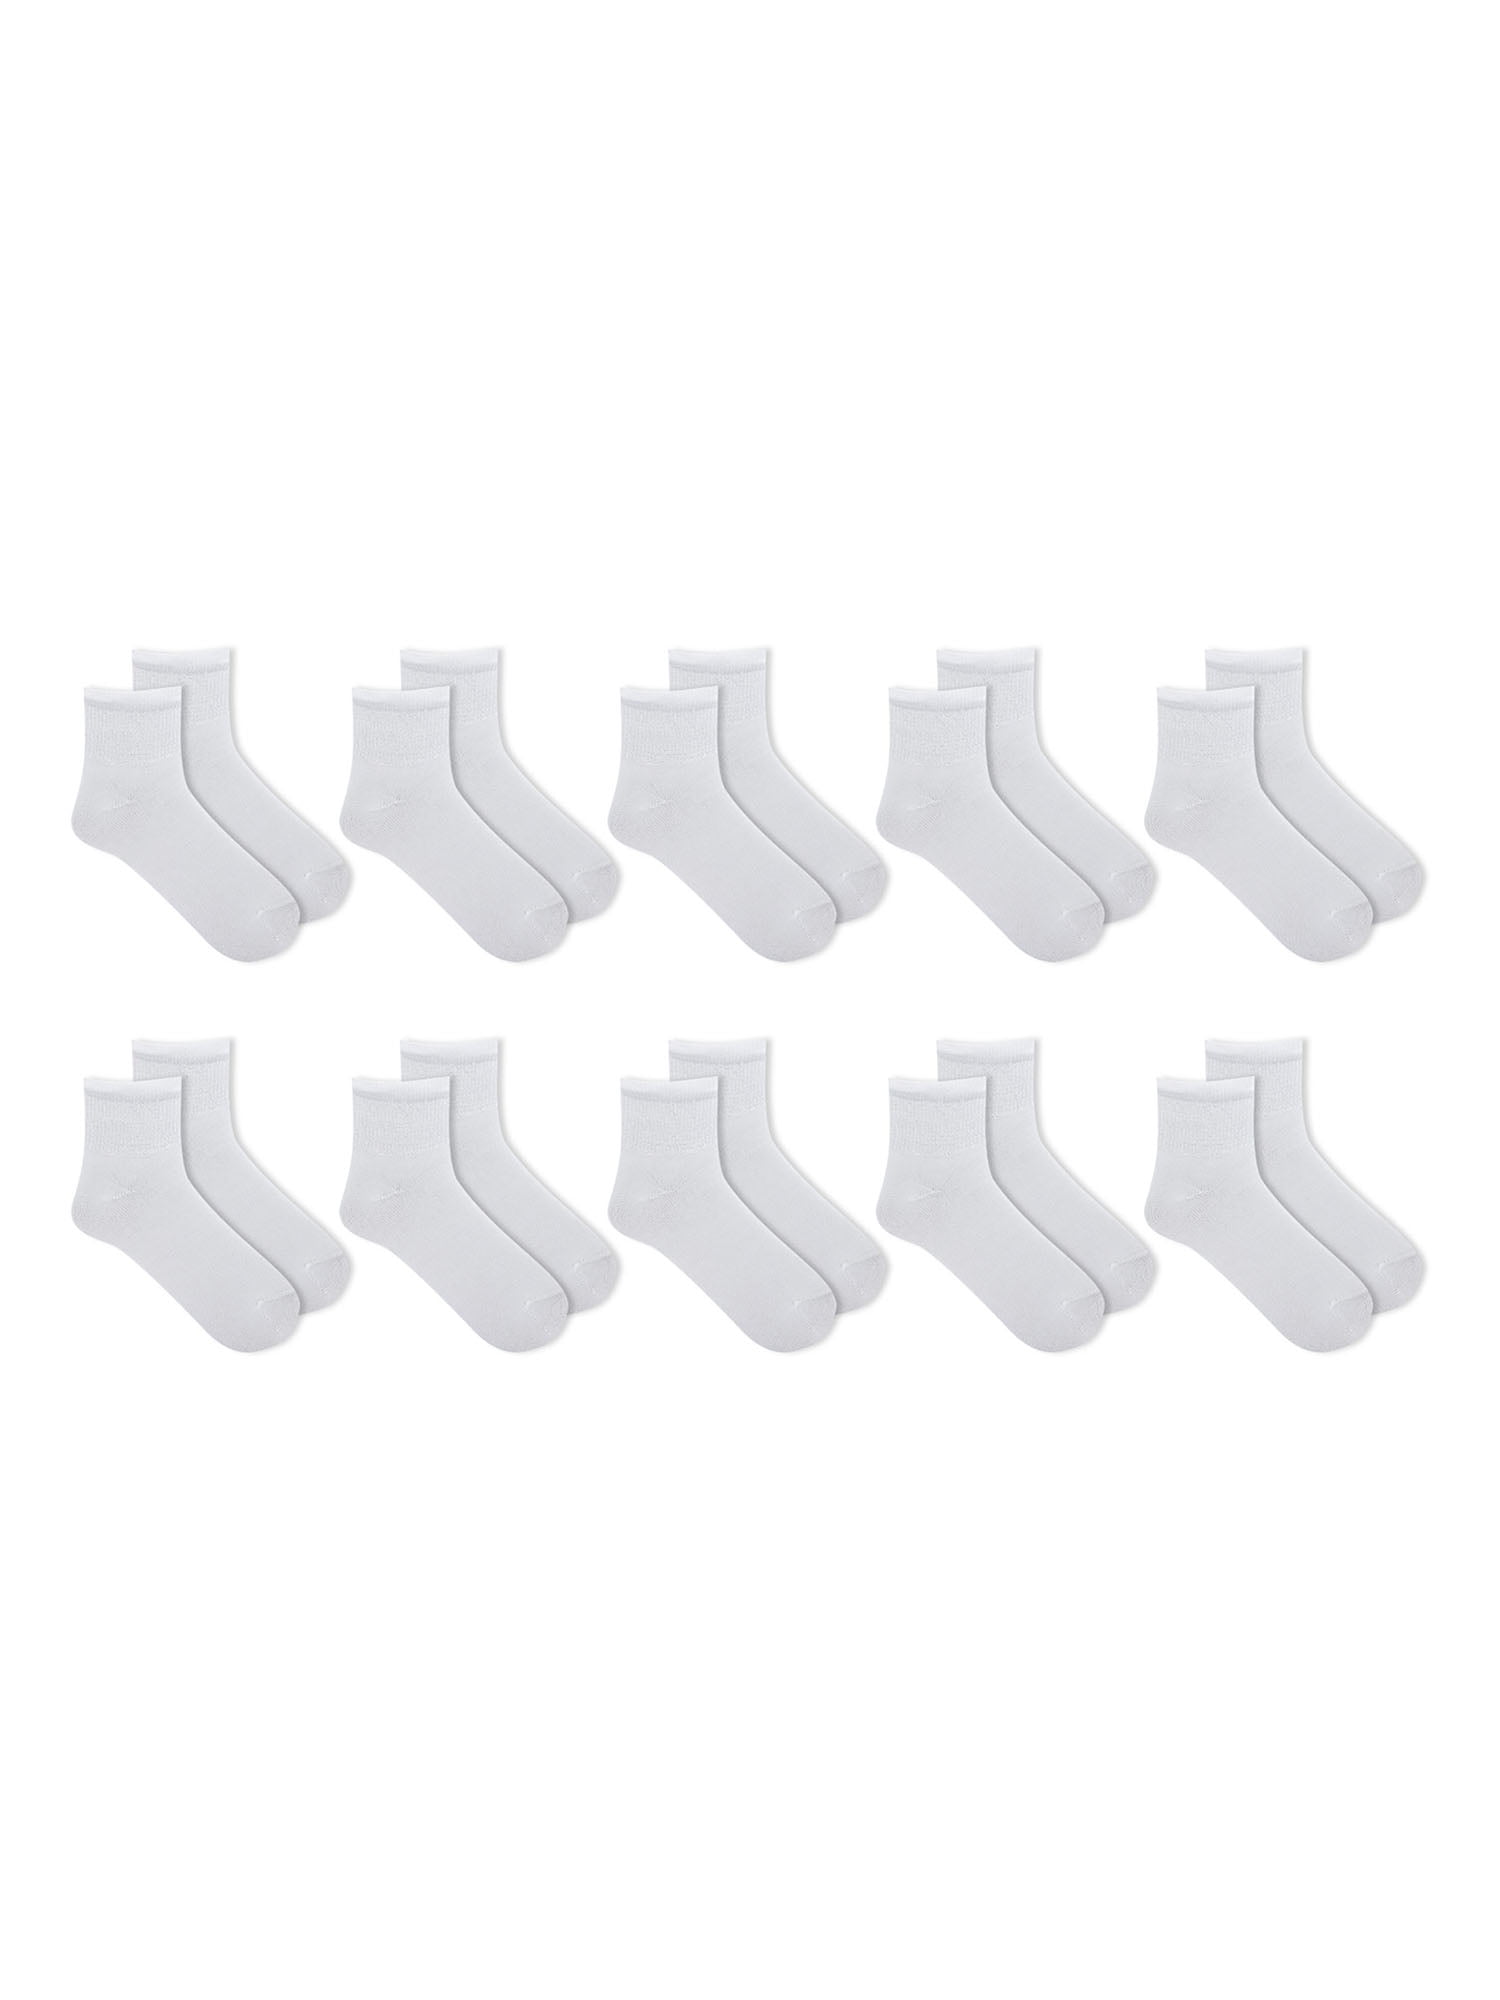 Athletic Works Women's Cushioned Ankle Socks 10 Pack - Walmart.com